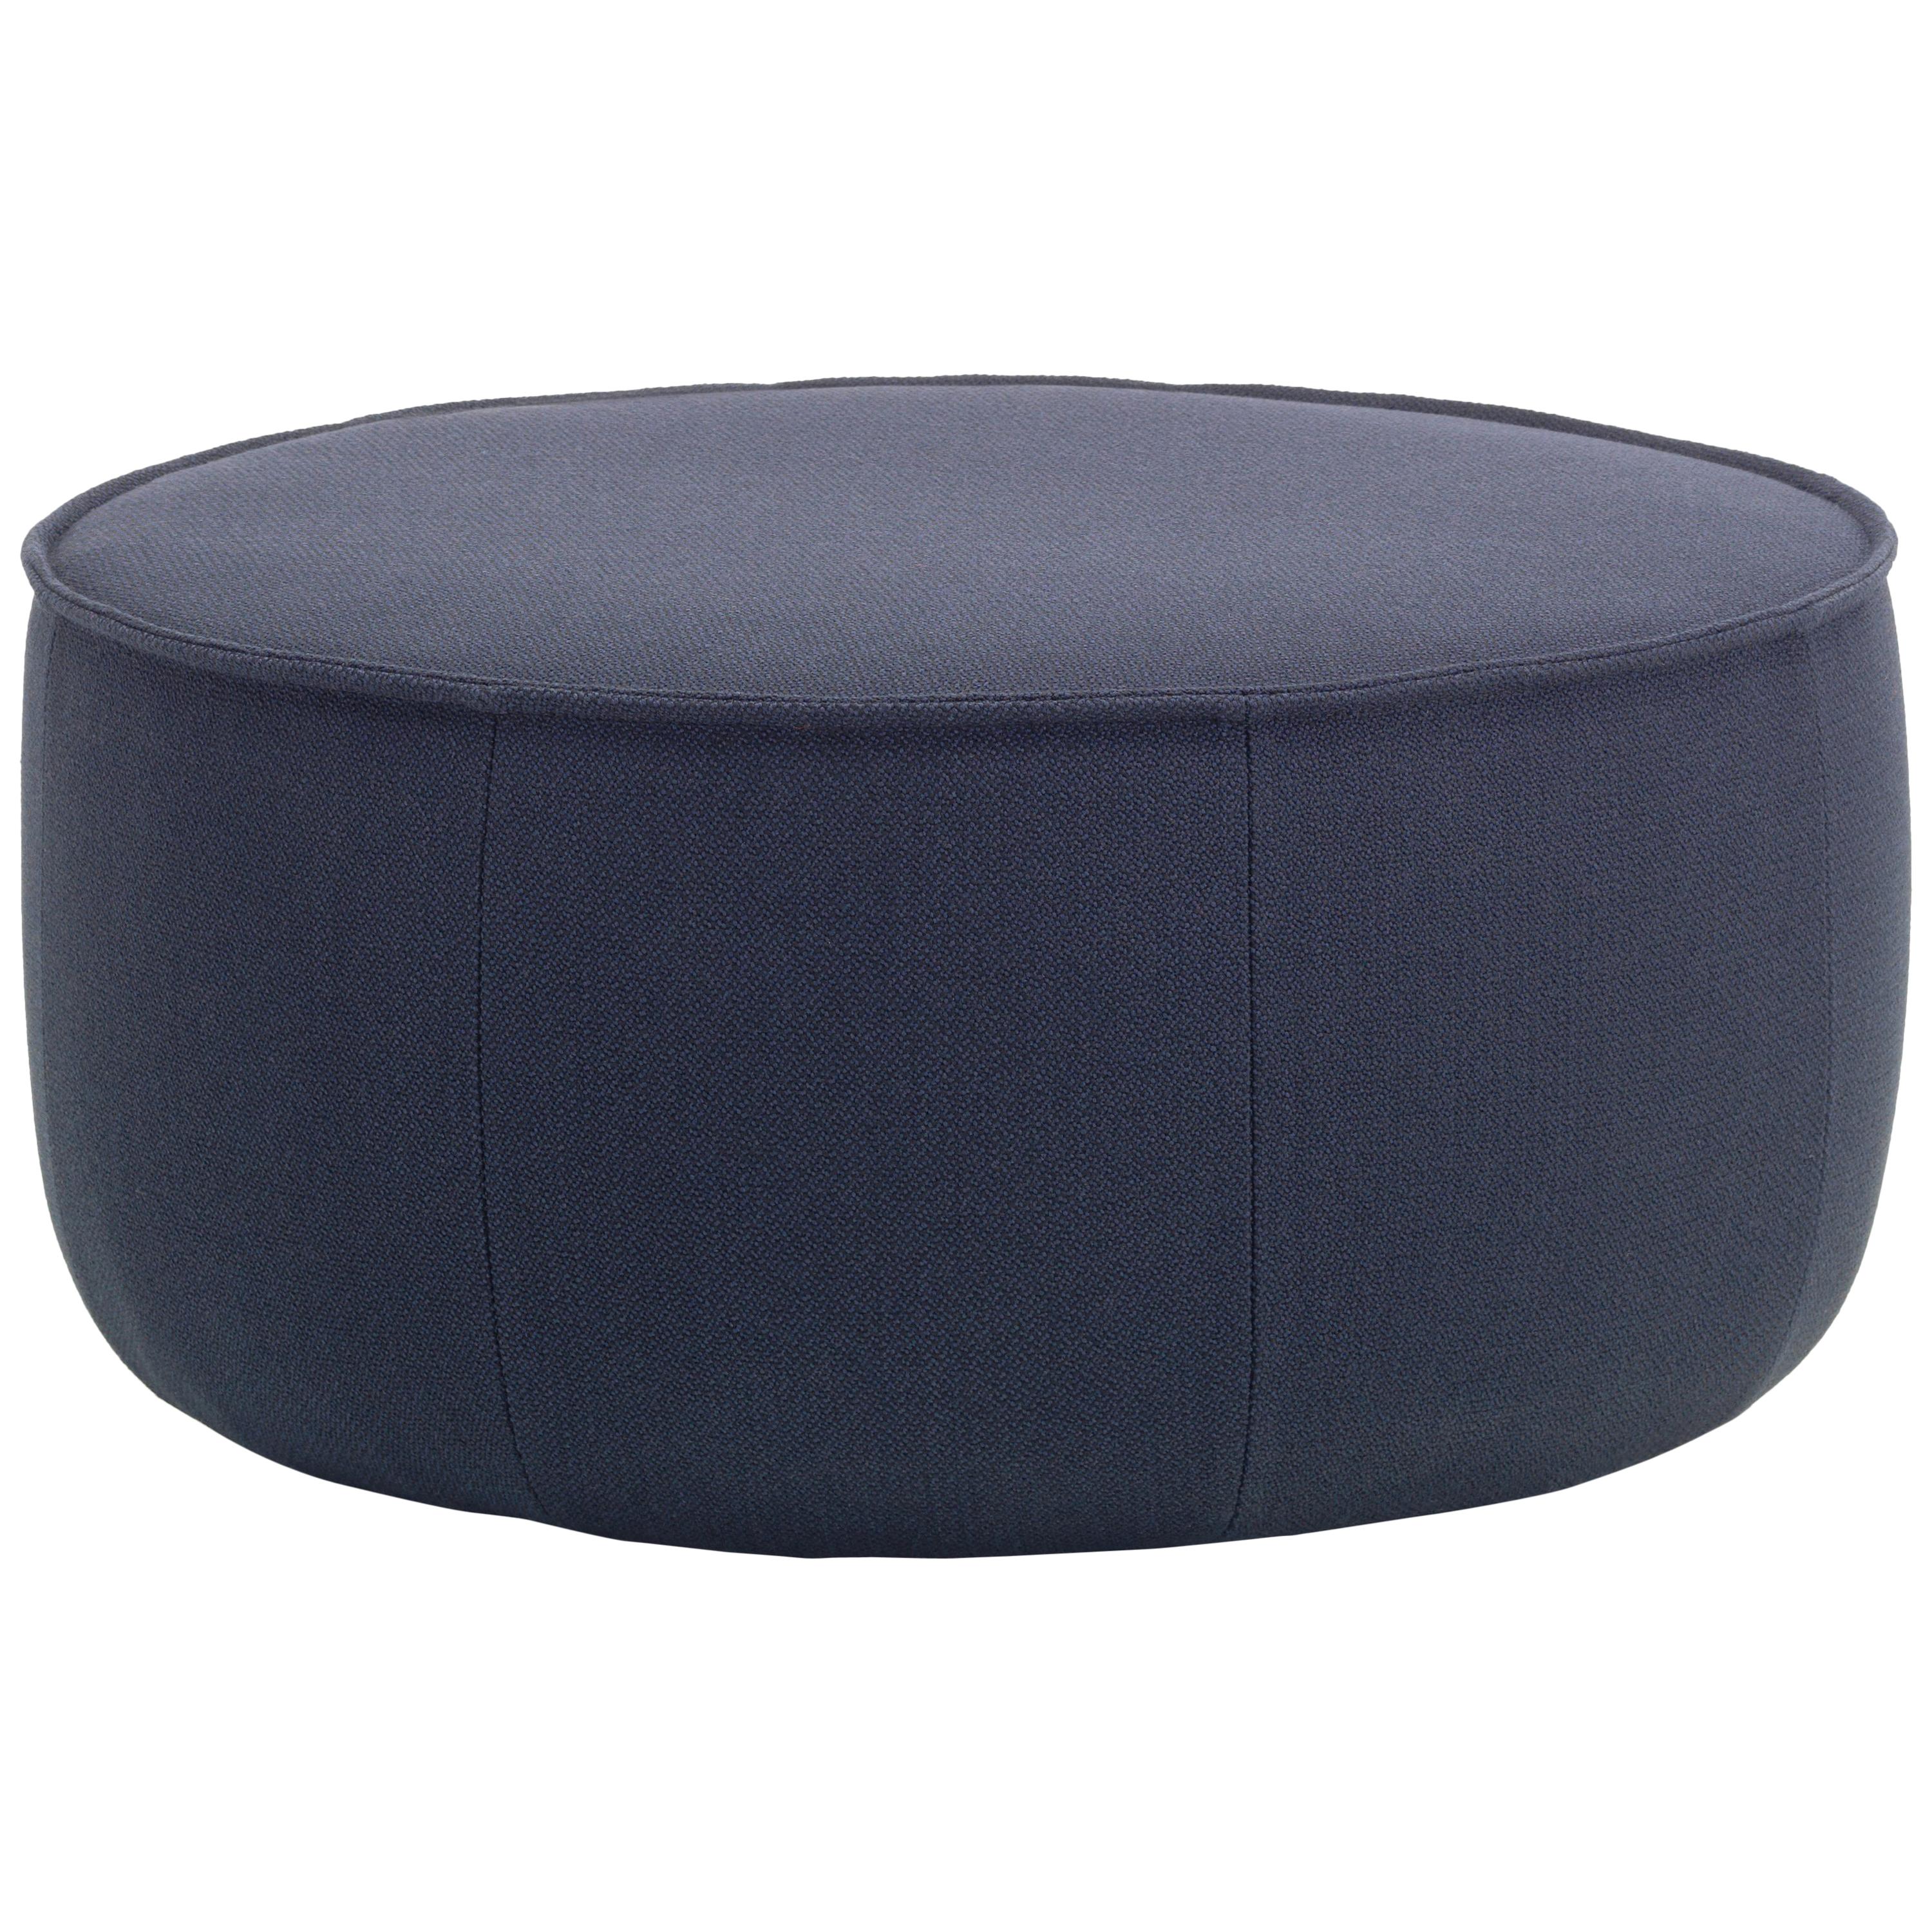 Vitra Mariposa Large Ottoman in Blue & Grey Dumet by Edward Barber & Jay Osgerby For Sale